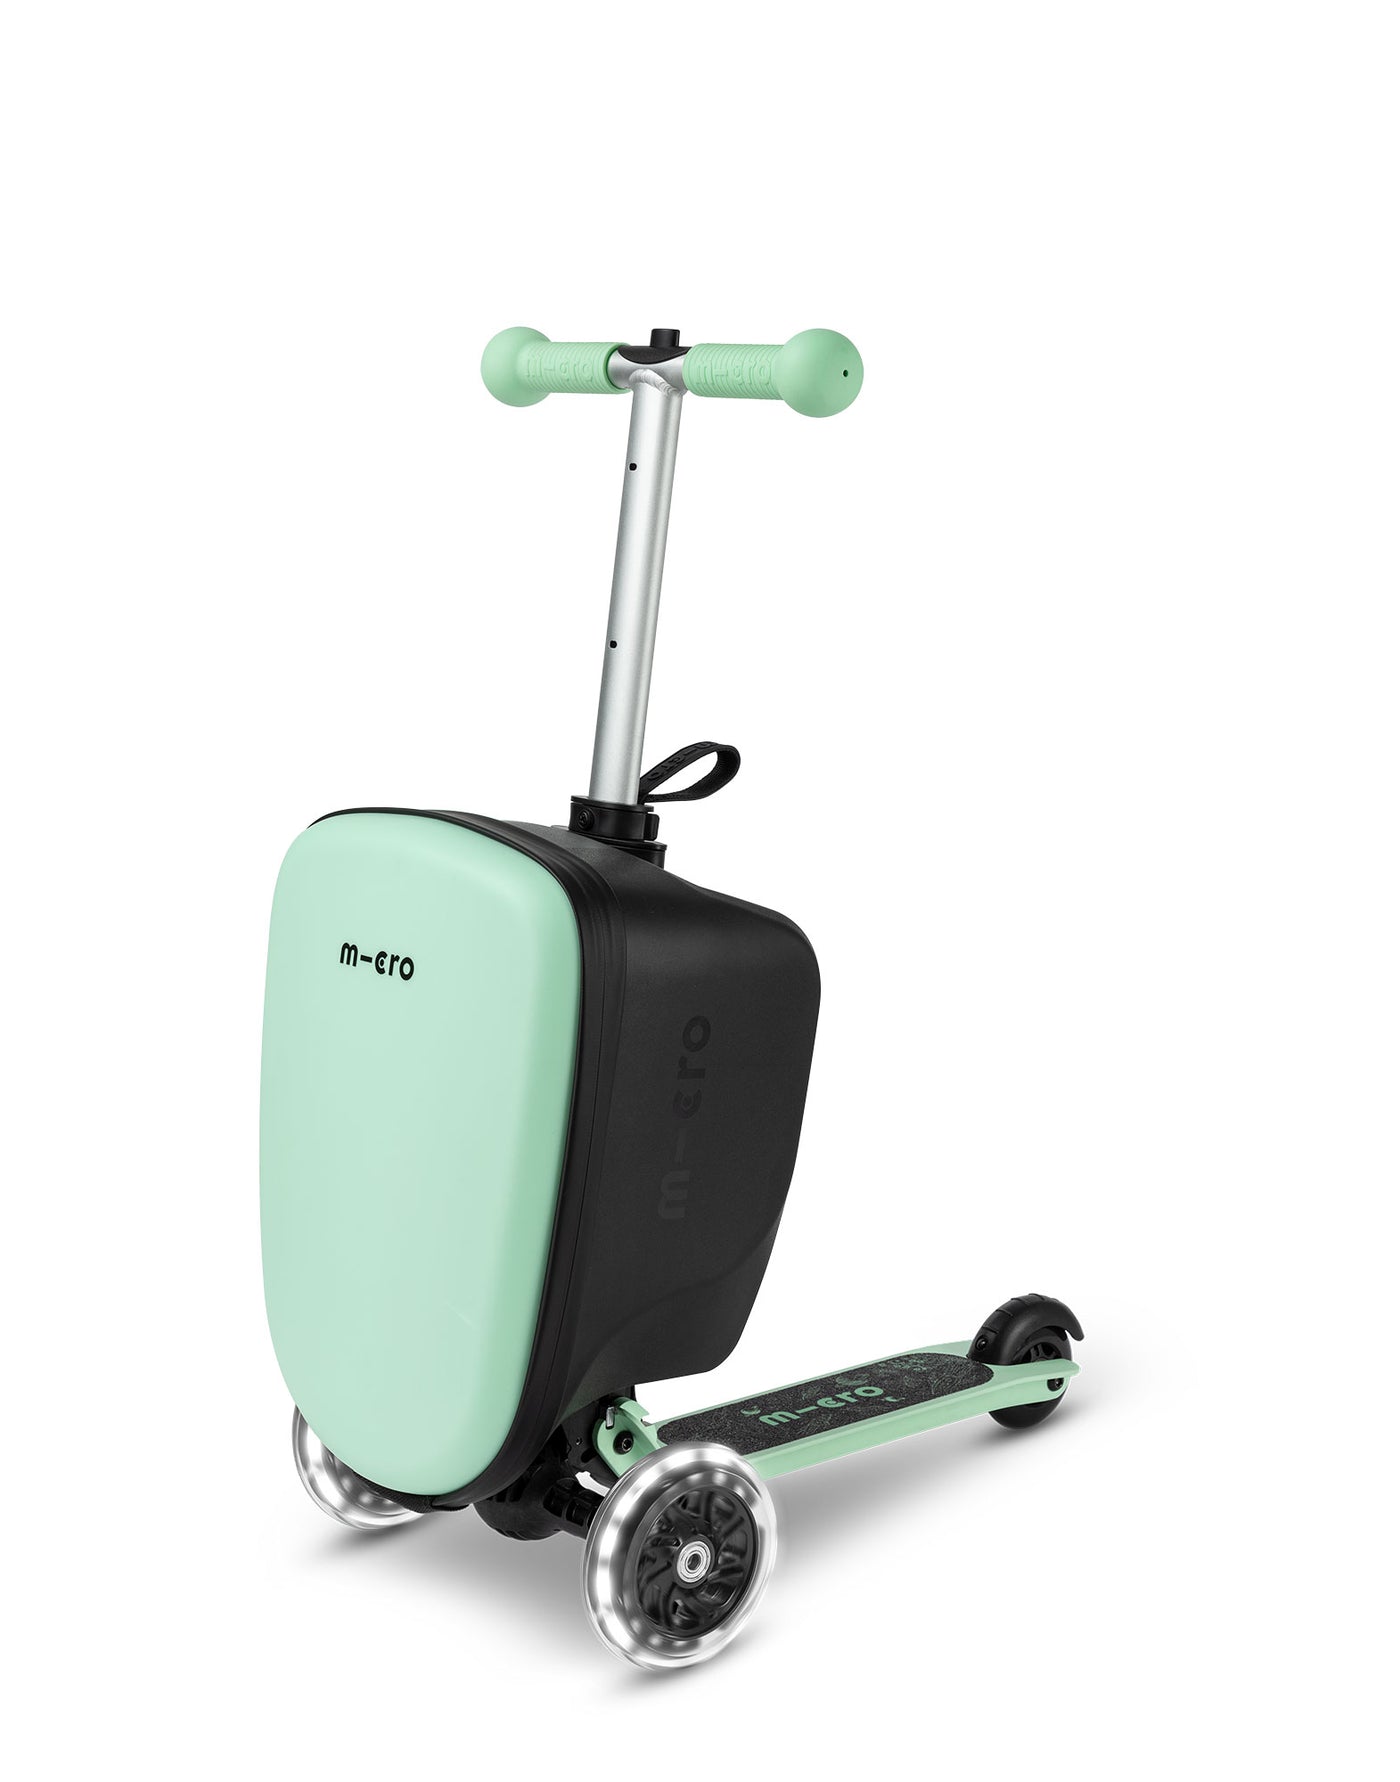 junior luggage scooter for toddlers